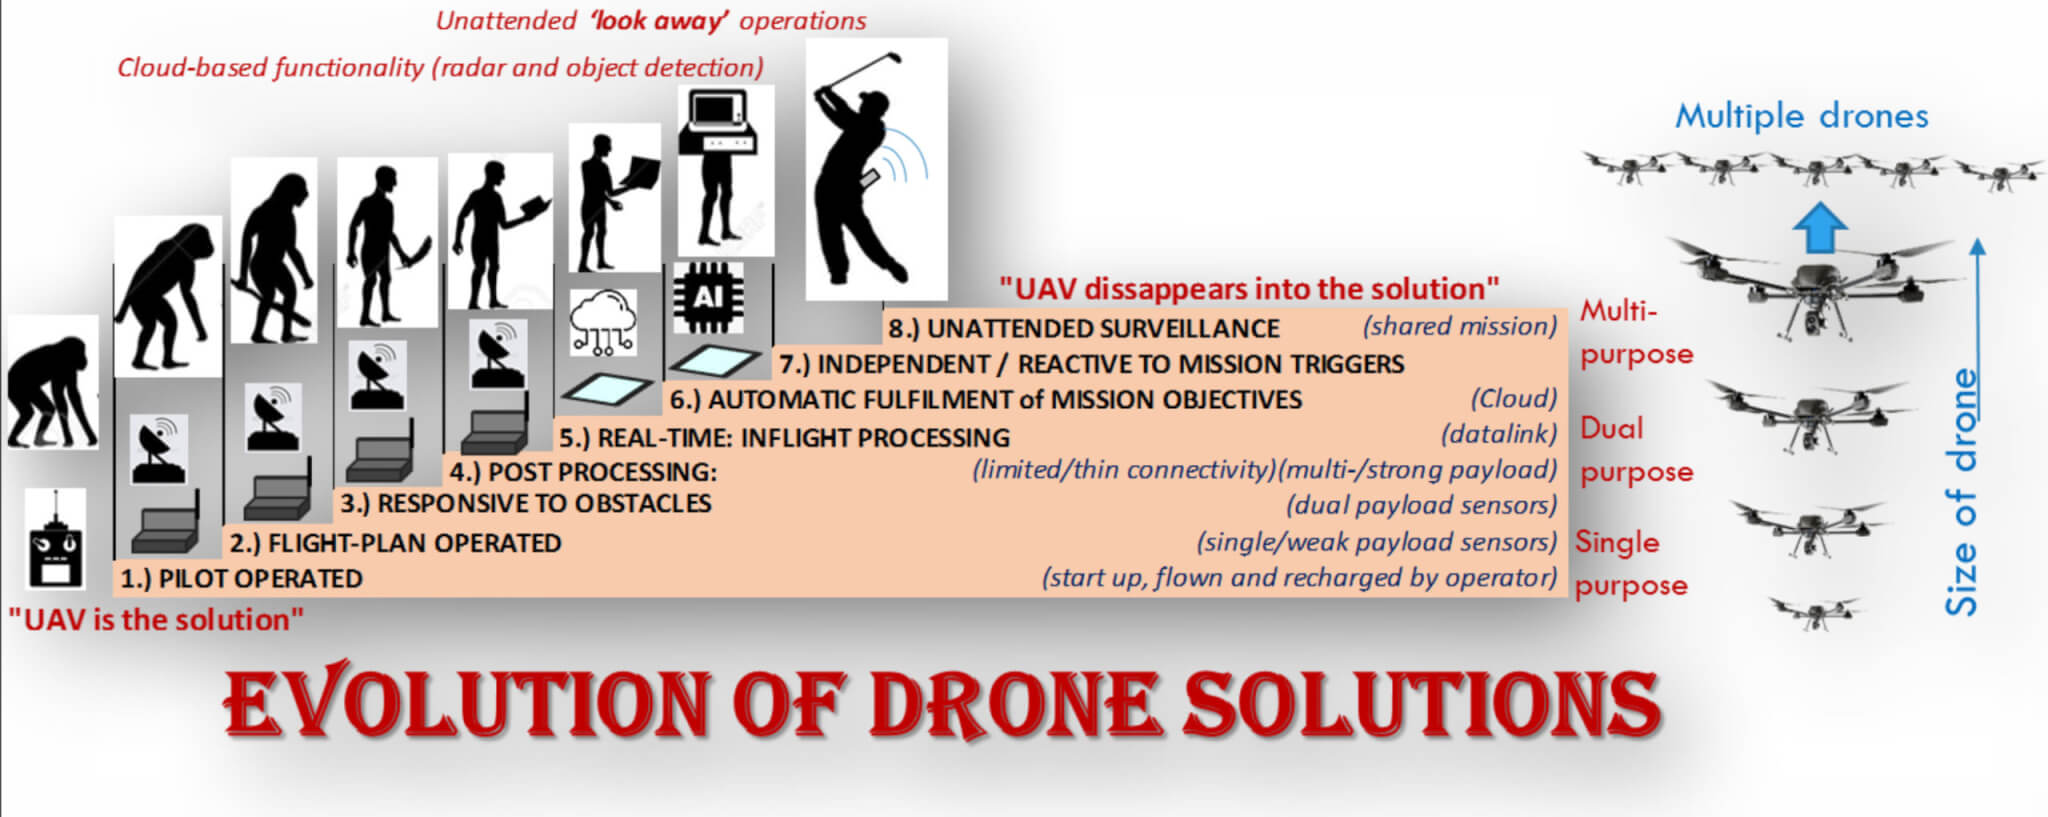 Evolution of drone solutions